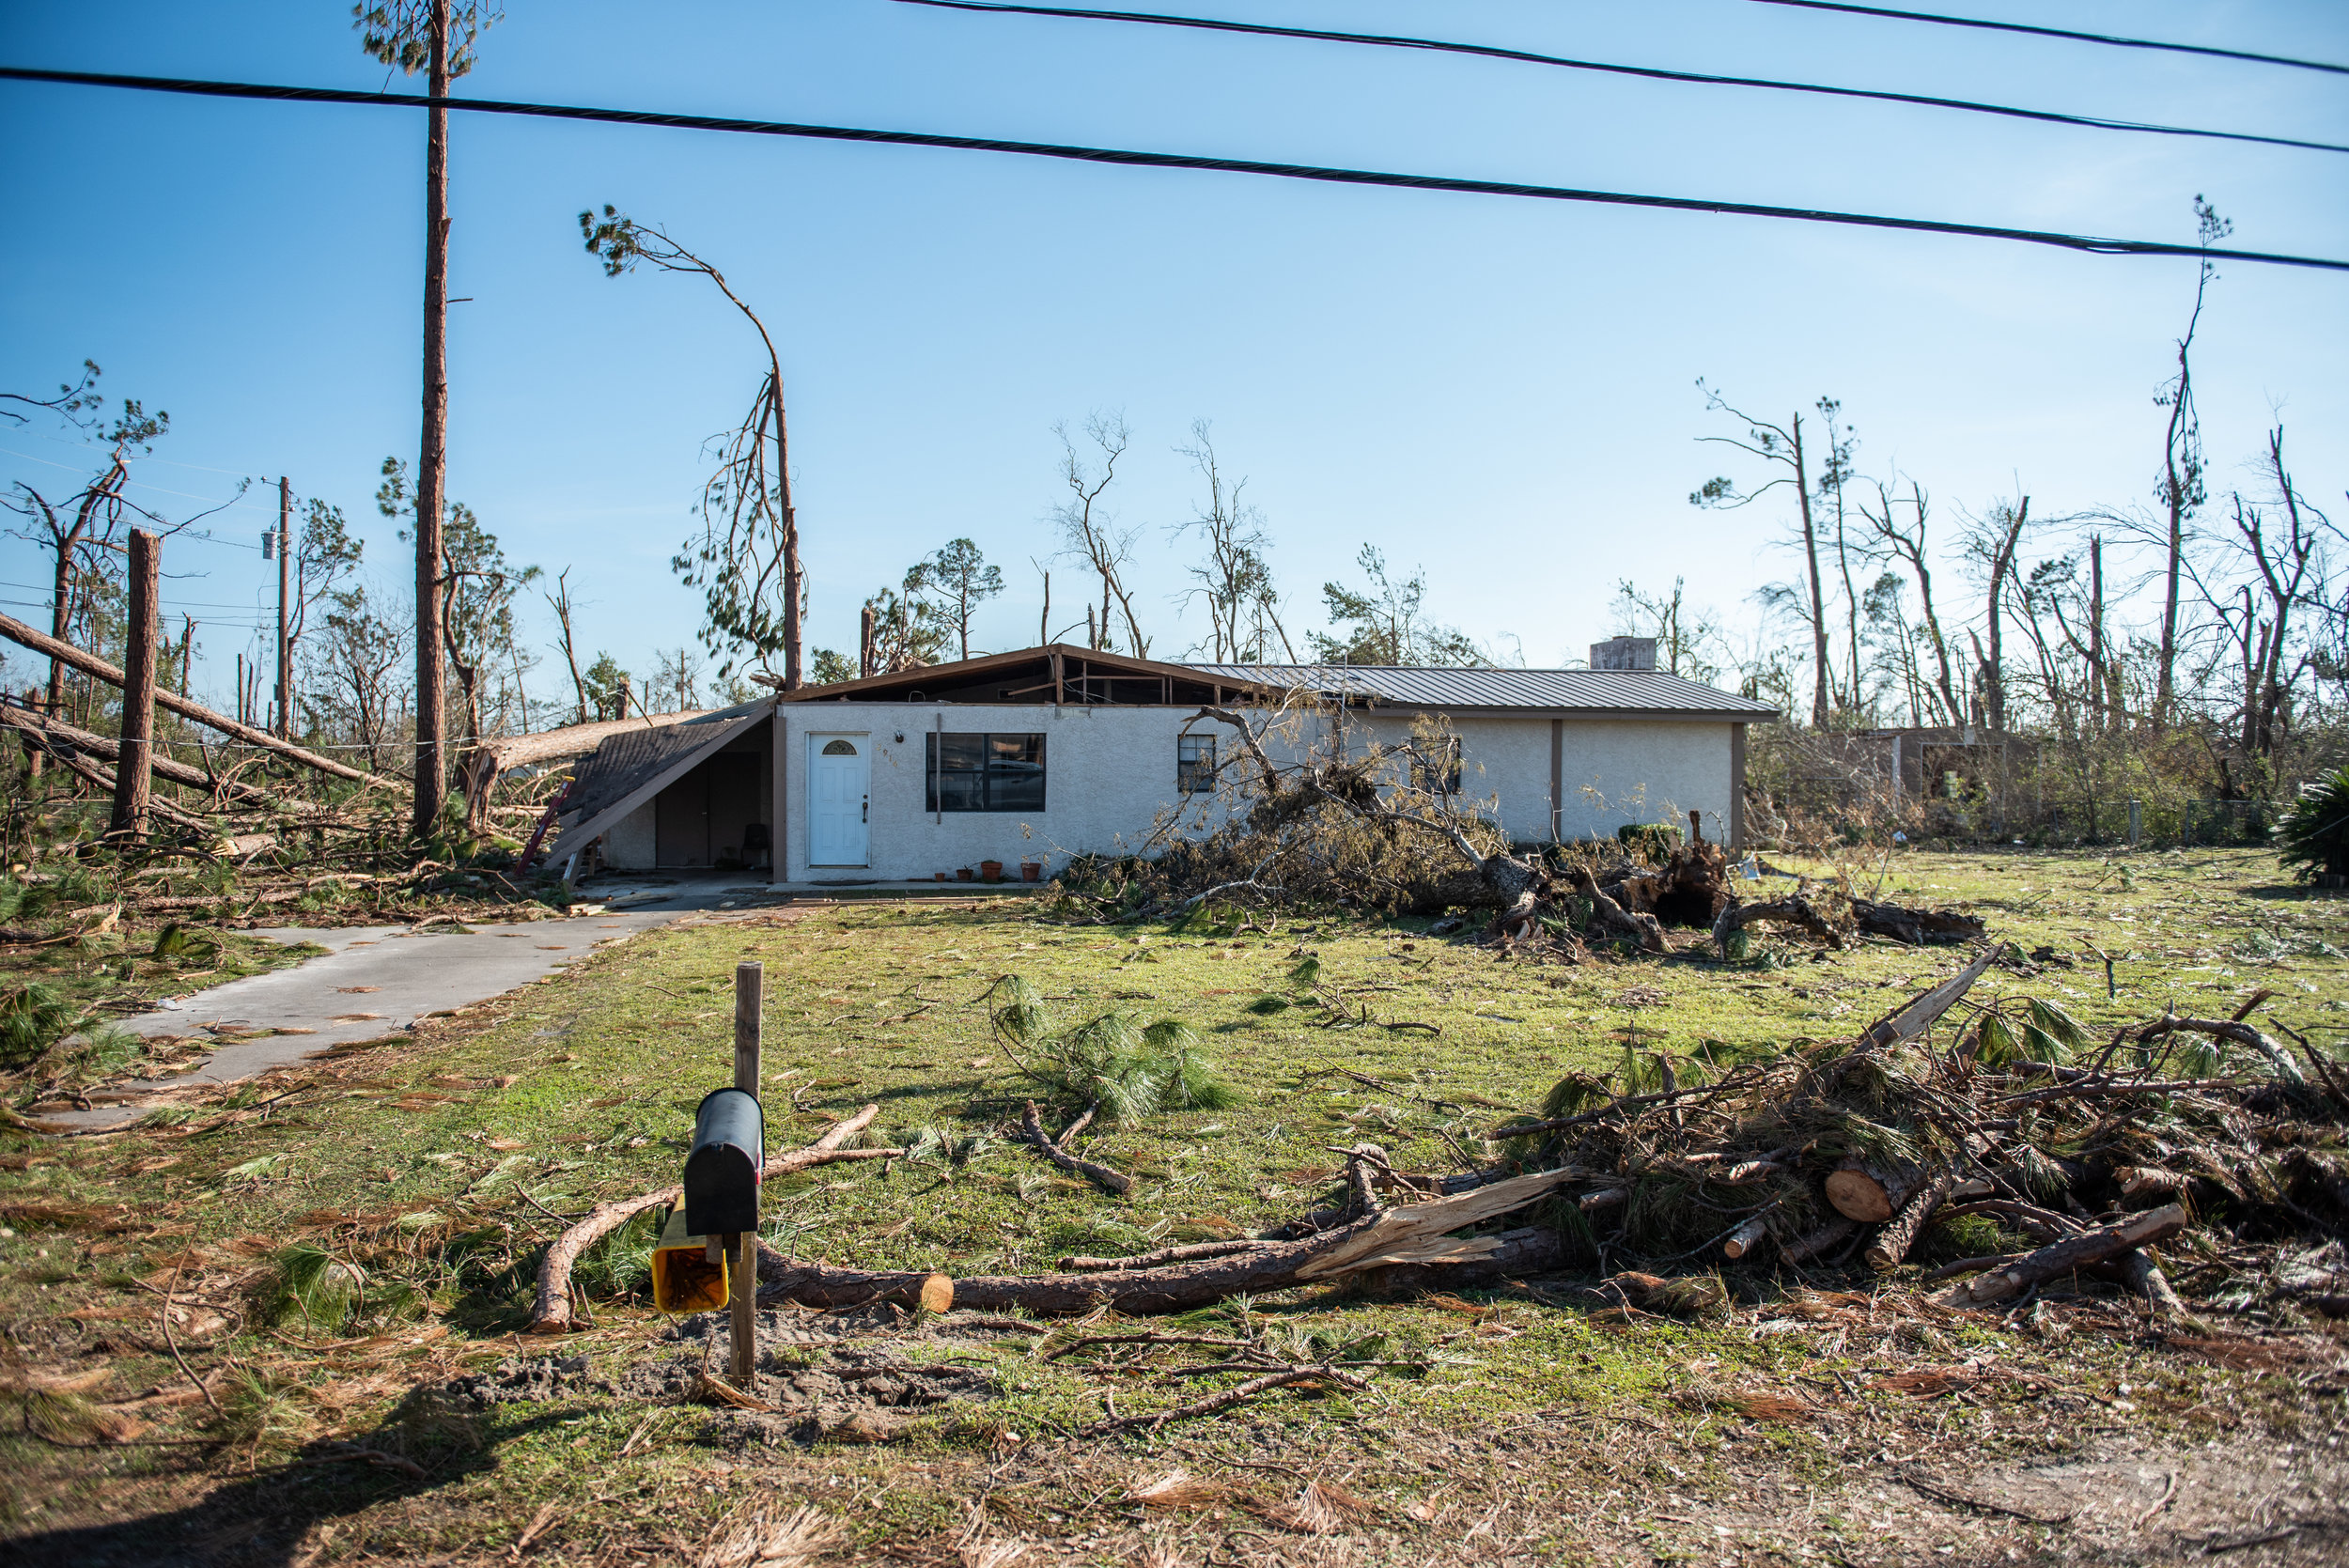   Hurricane Damage  Thousands of Florida residents are out the money they deserve to rebuild their home. It’s not too late to reopen your claim.   Get A Free Consultation  